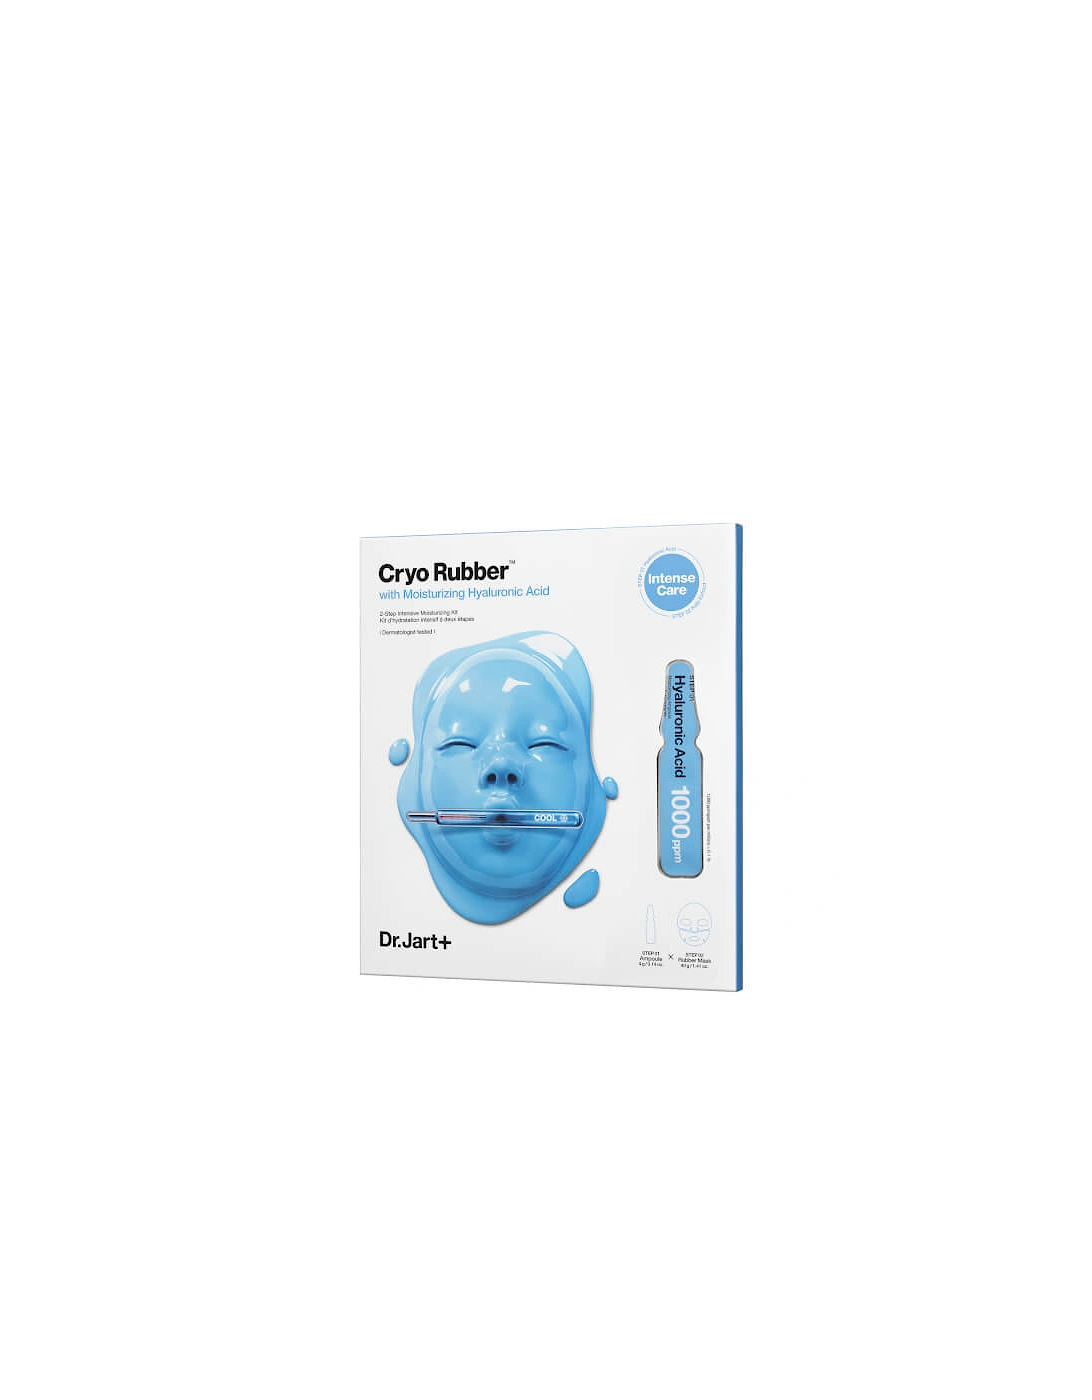 Dr.Jart+ Cryo Rubber Mask with Moisturising Hyaluronic Acid 44g, 2 of 1